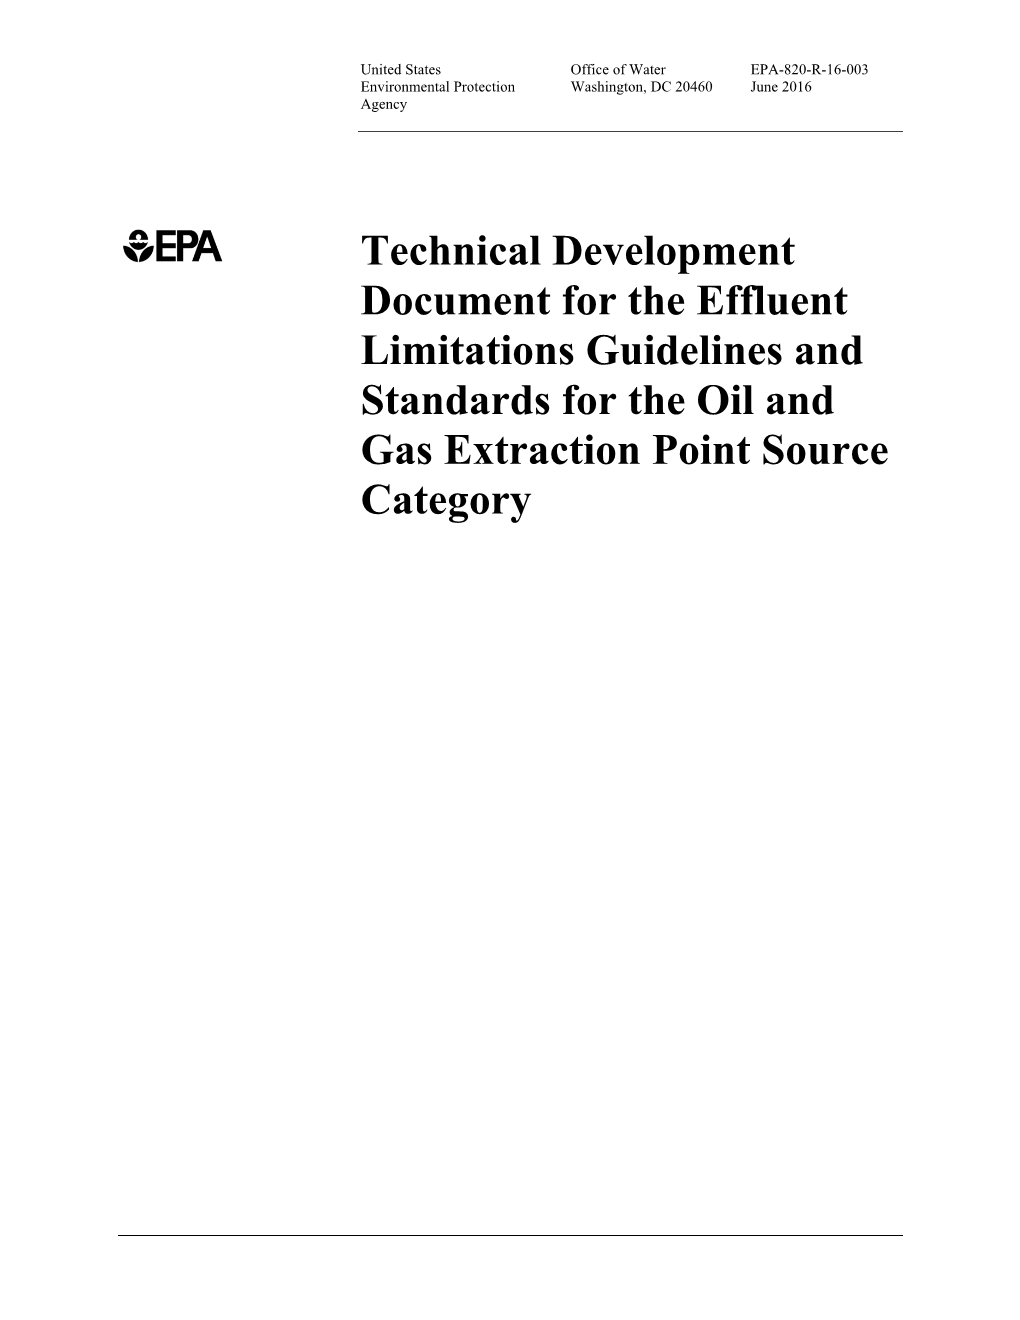 Technical Development Document for the Effluent Limitations Guidelines and Standards for the Oil and Gas Extraction Point Source Category